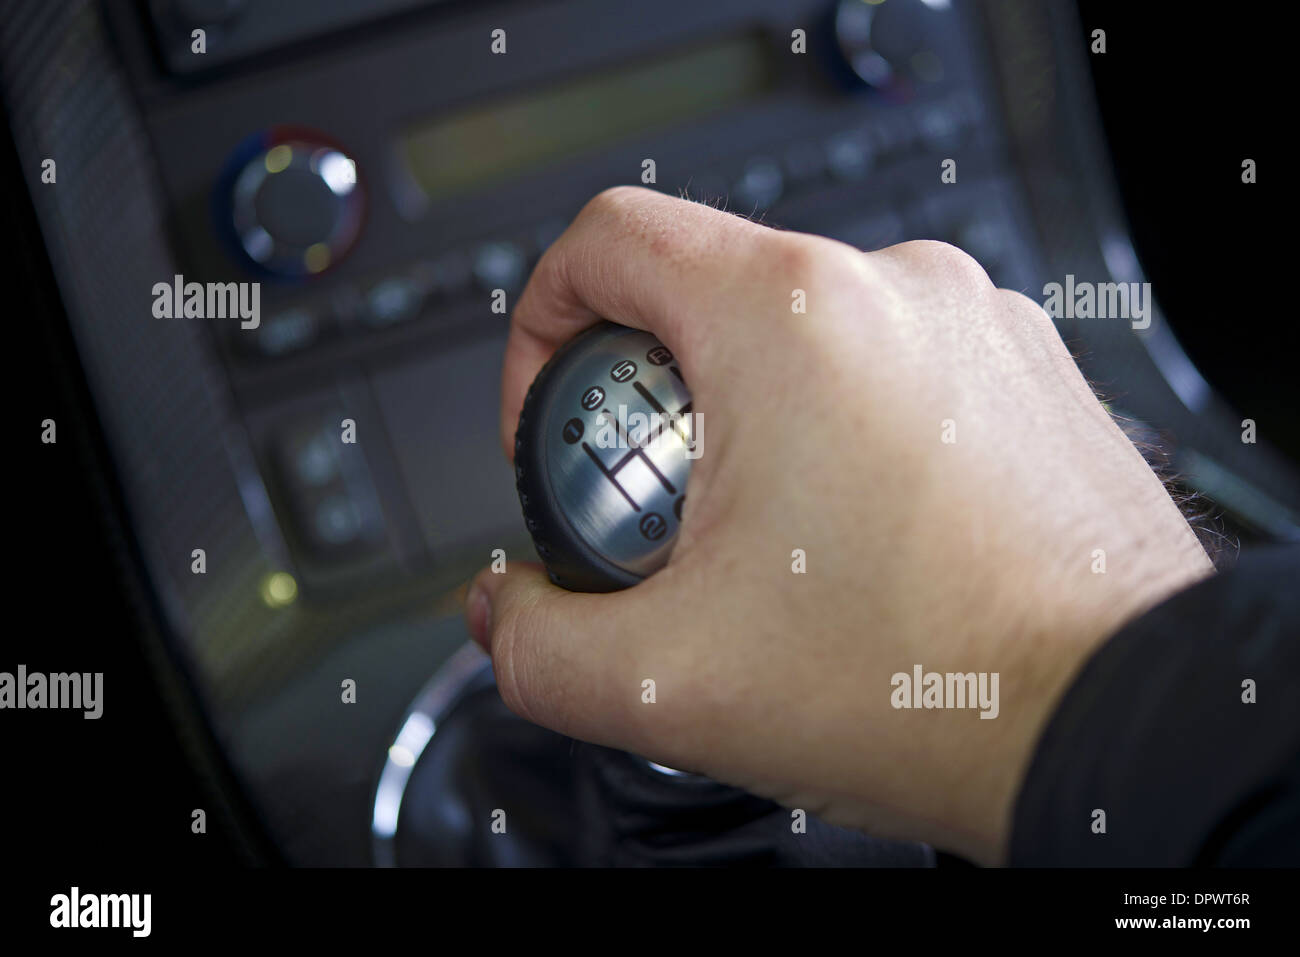 Driving Stick Shift - Hand on the Stick. Manual Car Transmission. Transportation Collection. Stock Photo